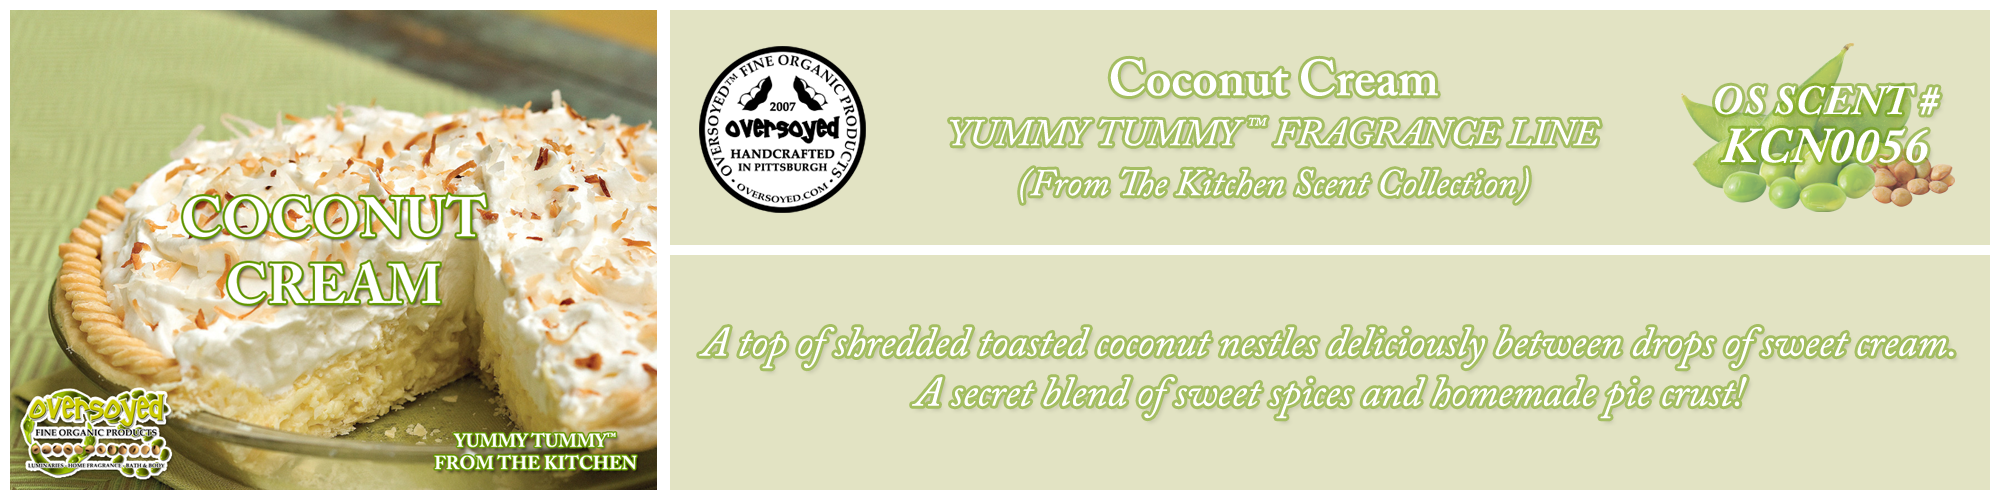 Coconut Cream Handcrafted Products Collection